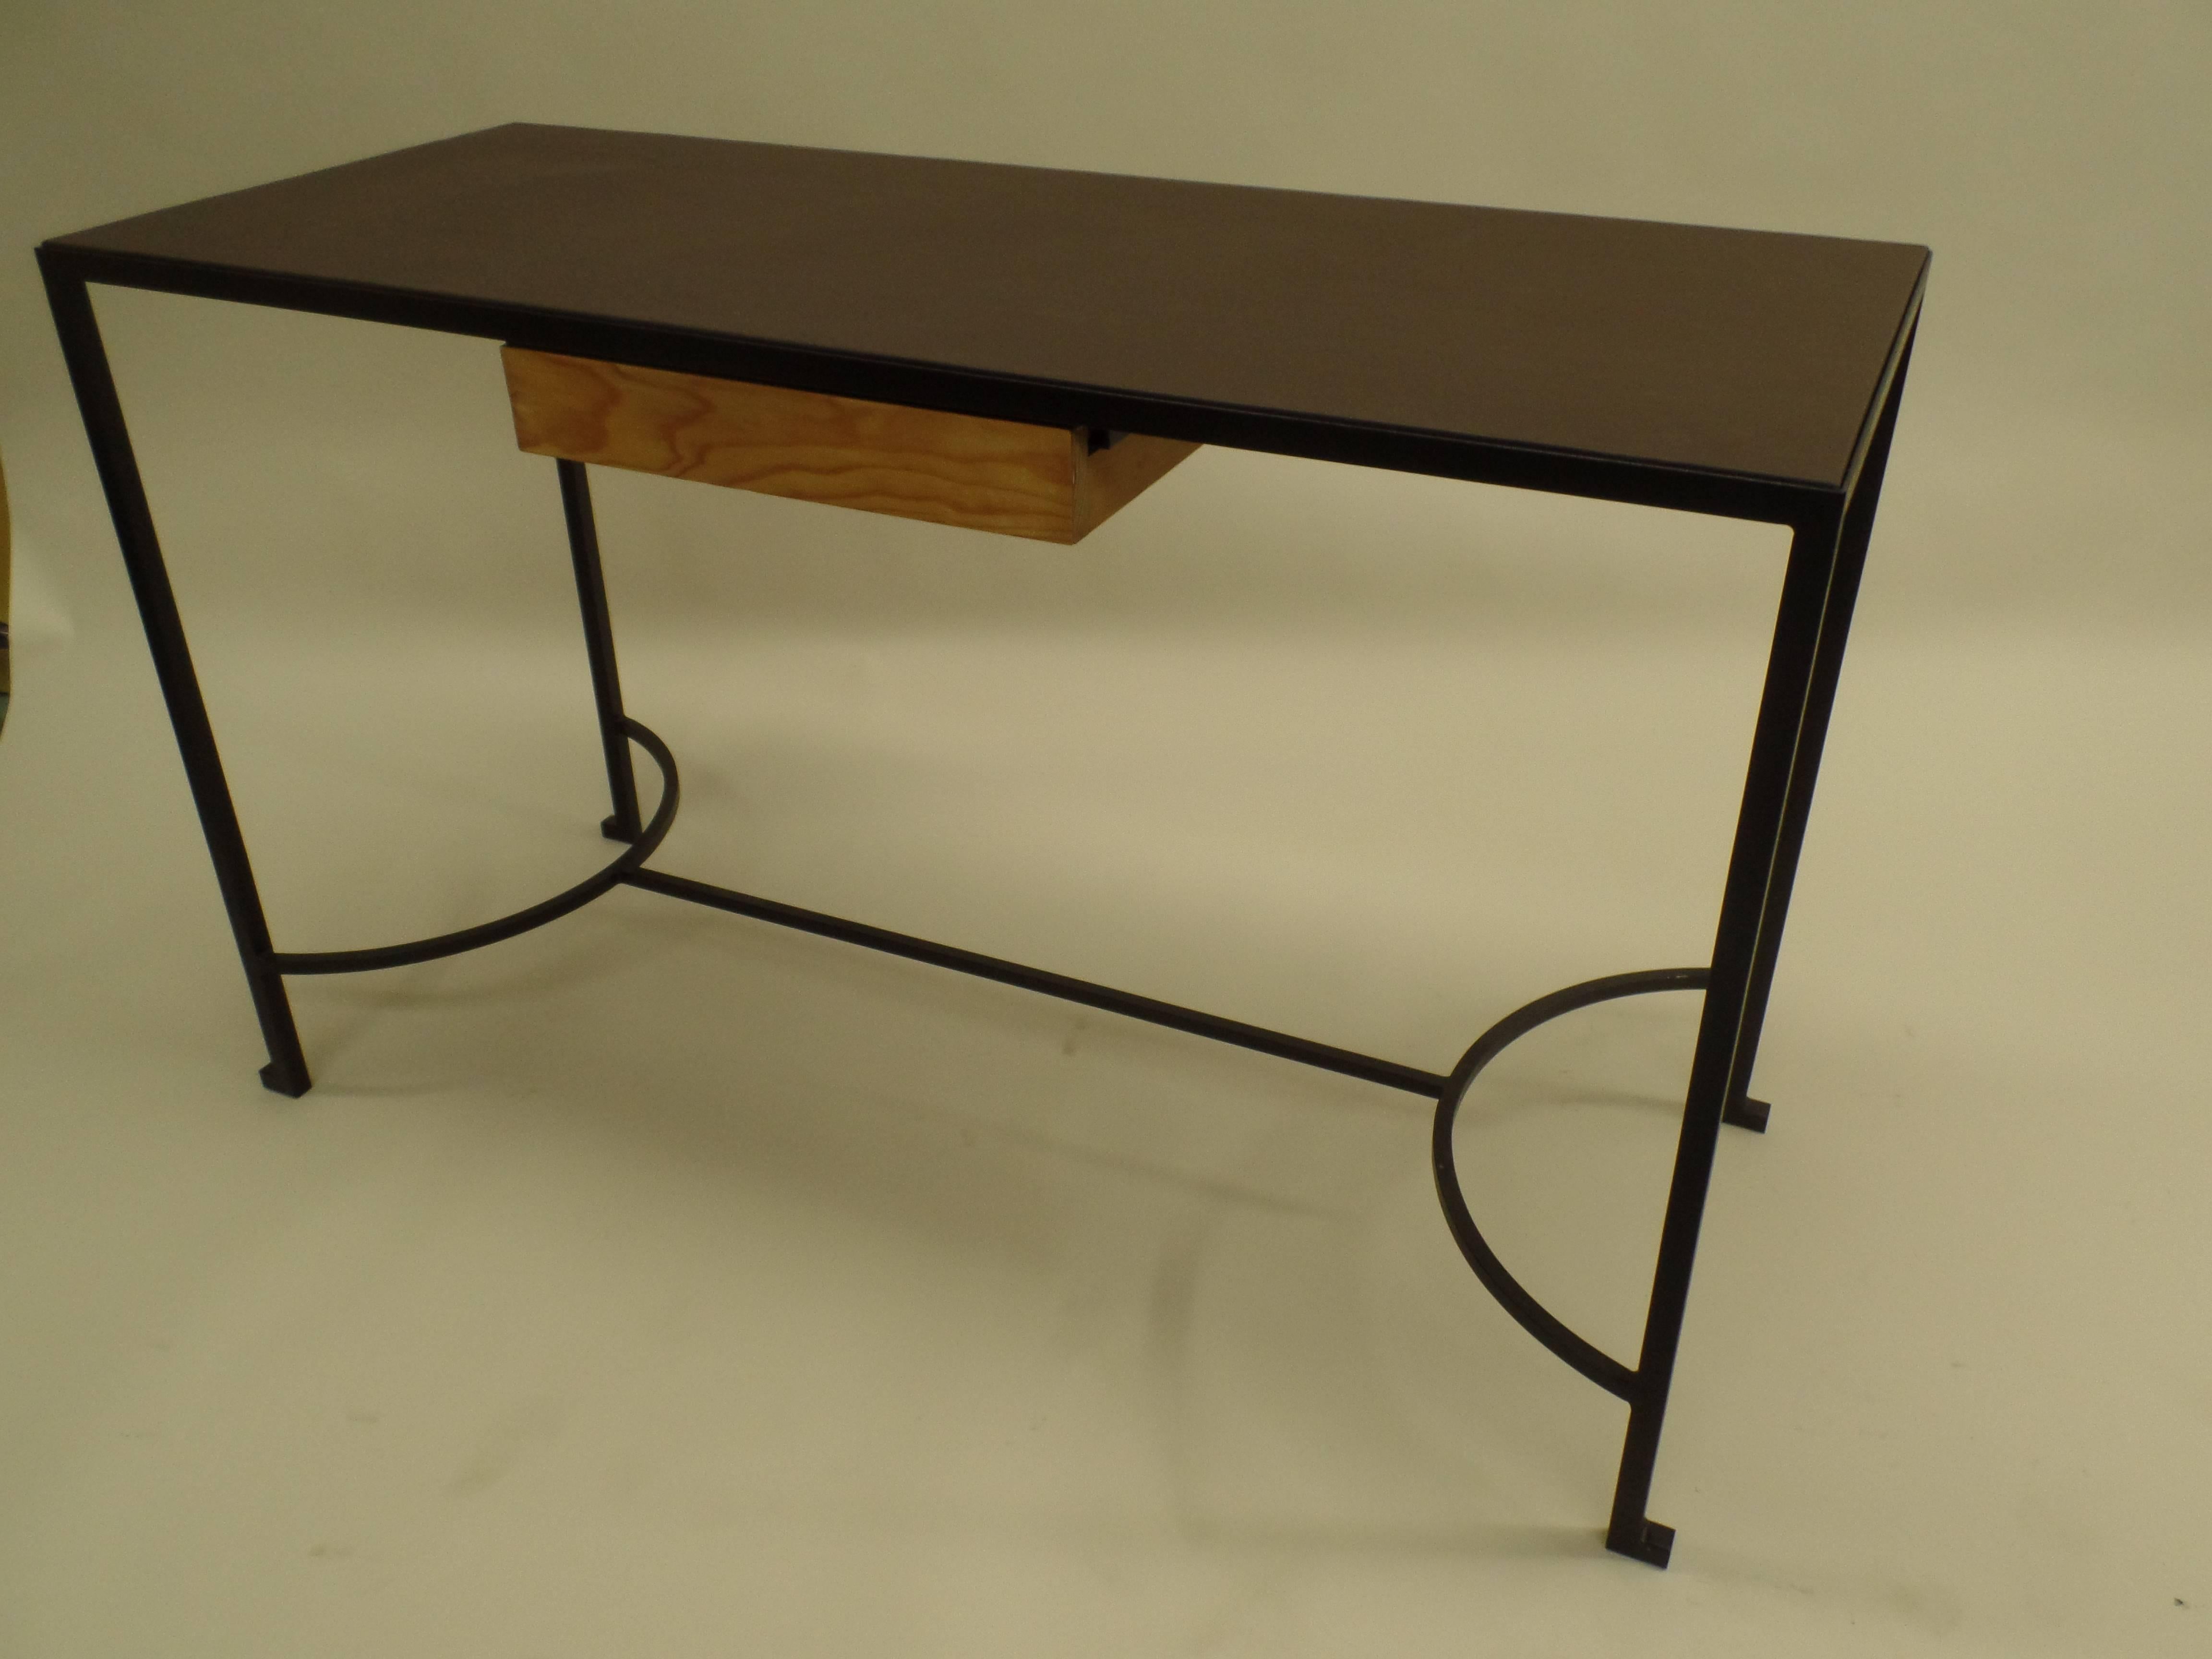 French Mid-Century console / desk attributed to Marc du Plantier in the modern neoclassical taste.

The piece is composed of hand wrought iron legs and base with an inset leather top and one wood pencil drawer. The delicate legs are united by a